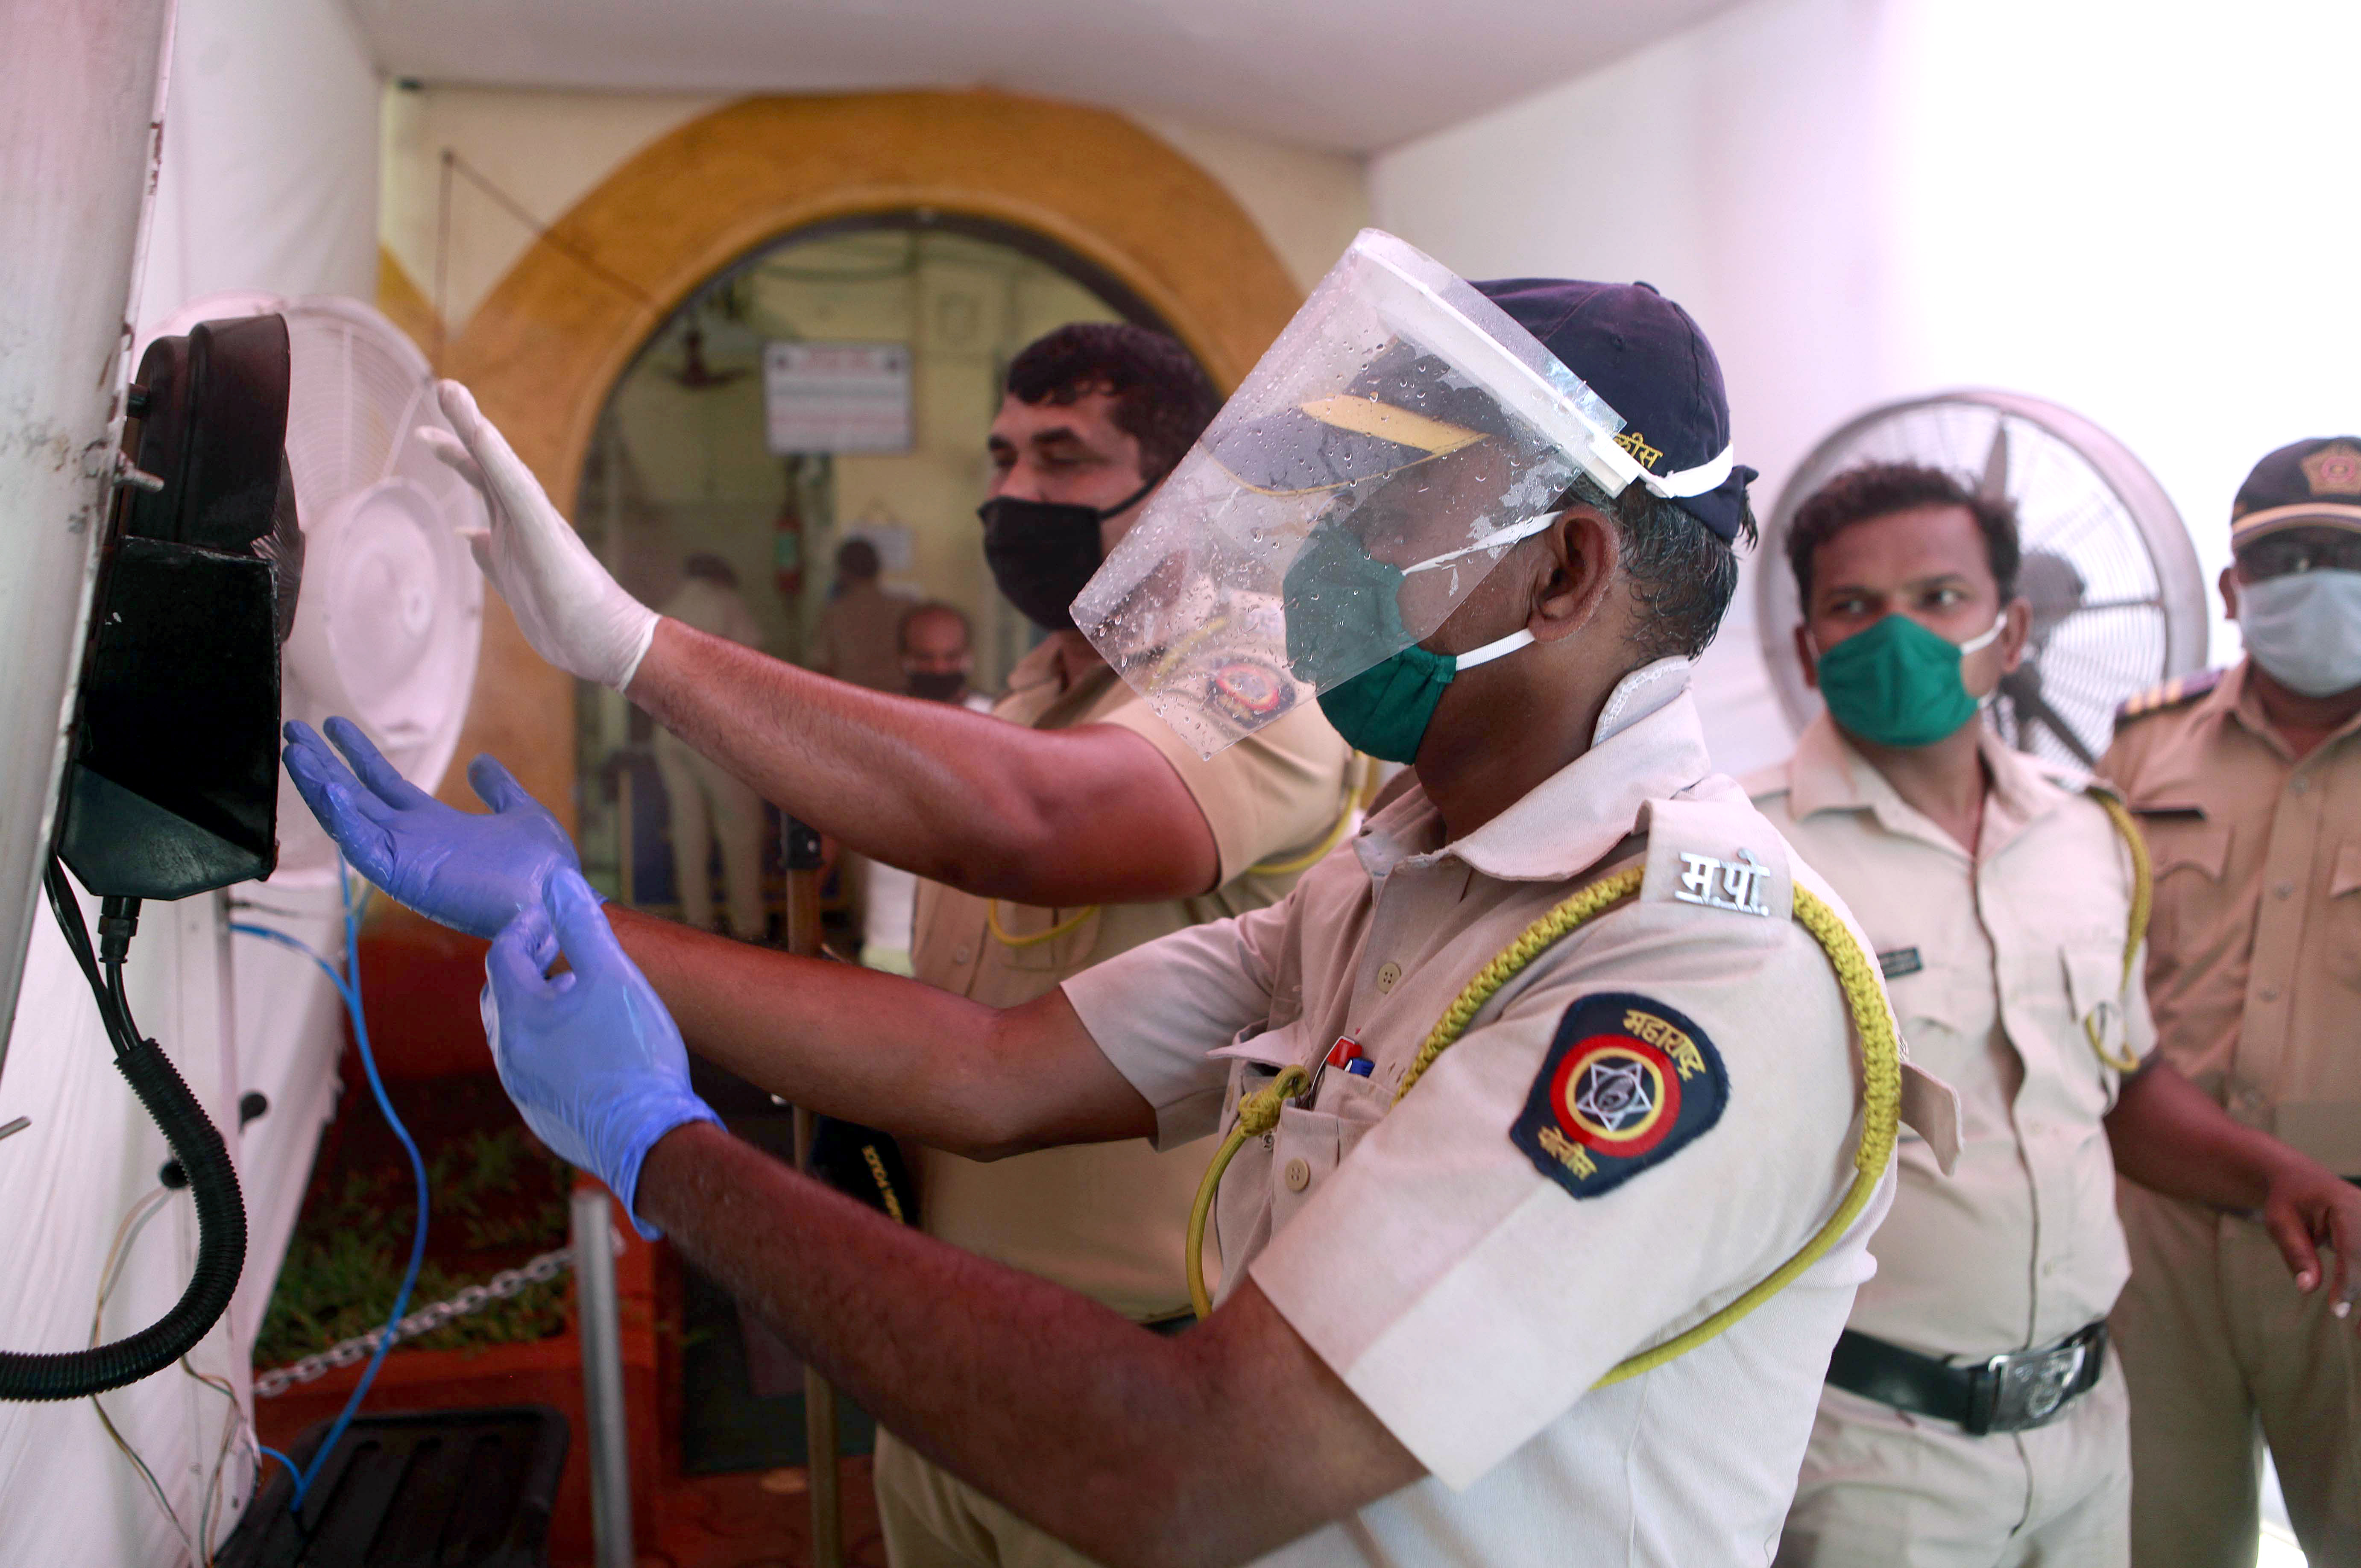 Fresh 121 Covid-19 cases in Maharashtra Police, total infections cross 9,000 till date